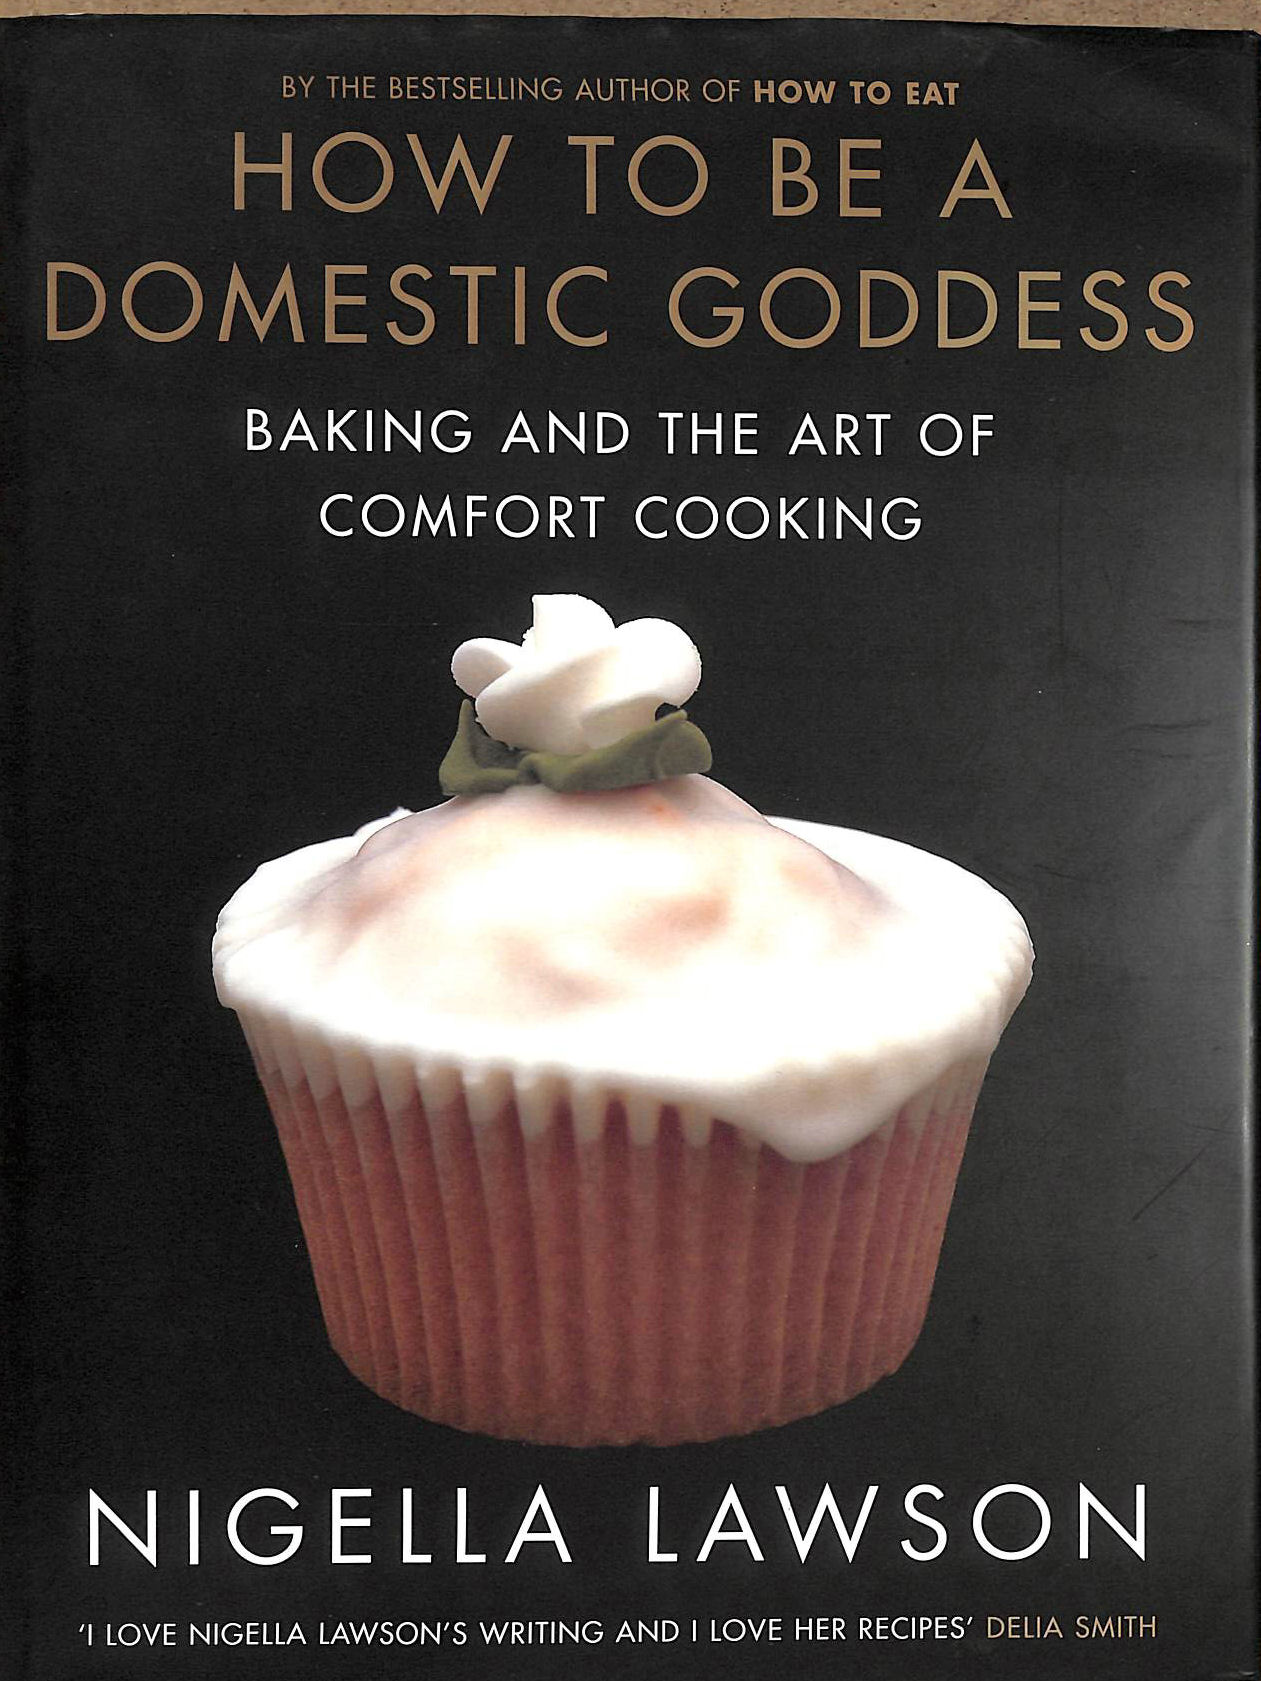 LAWSON, NIGELLA - How To Be A Domestic Goddess Baking and the Art of Comfort Cooking